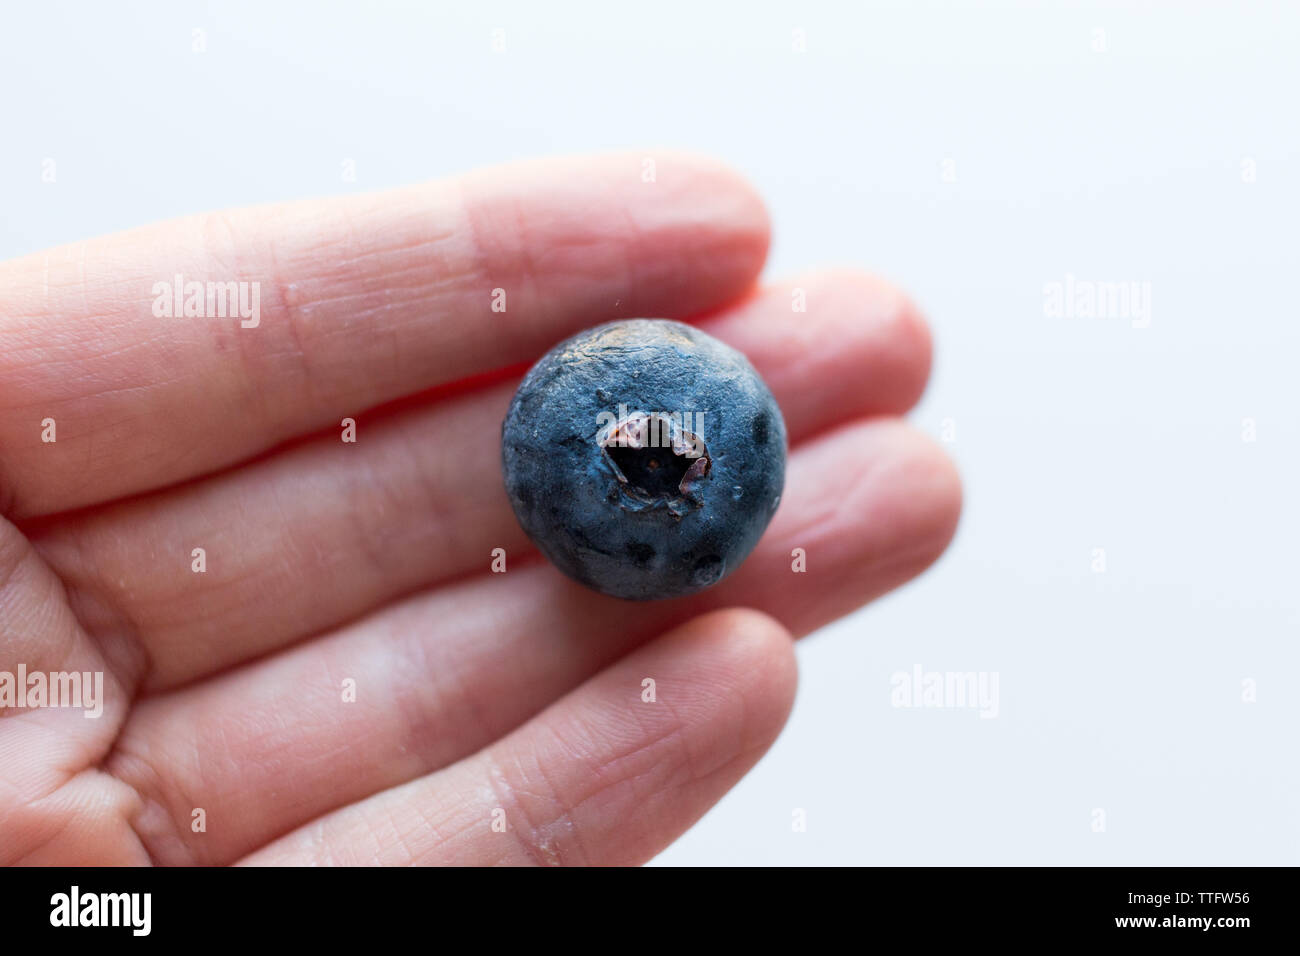 Close-up of Single Blueberry in a hand Stock Photo